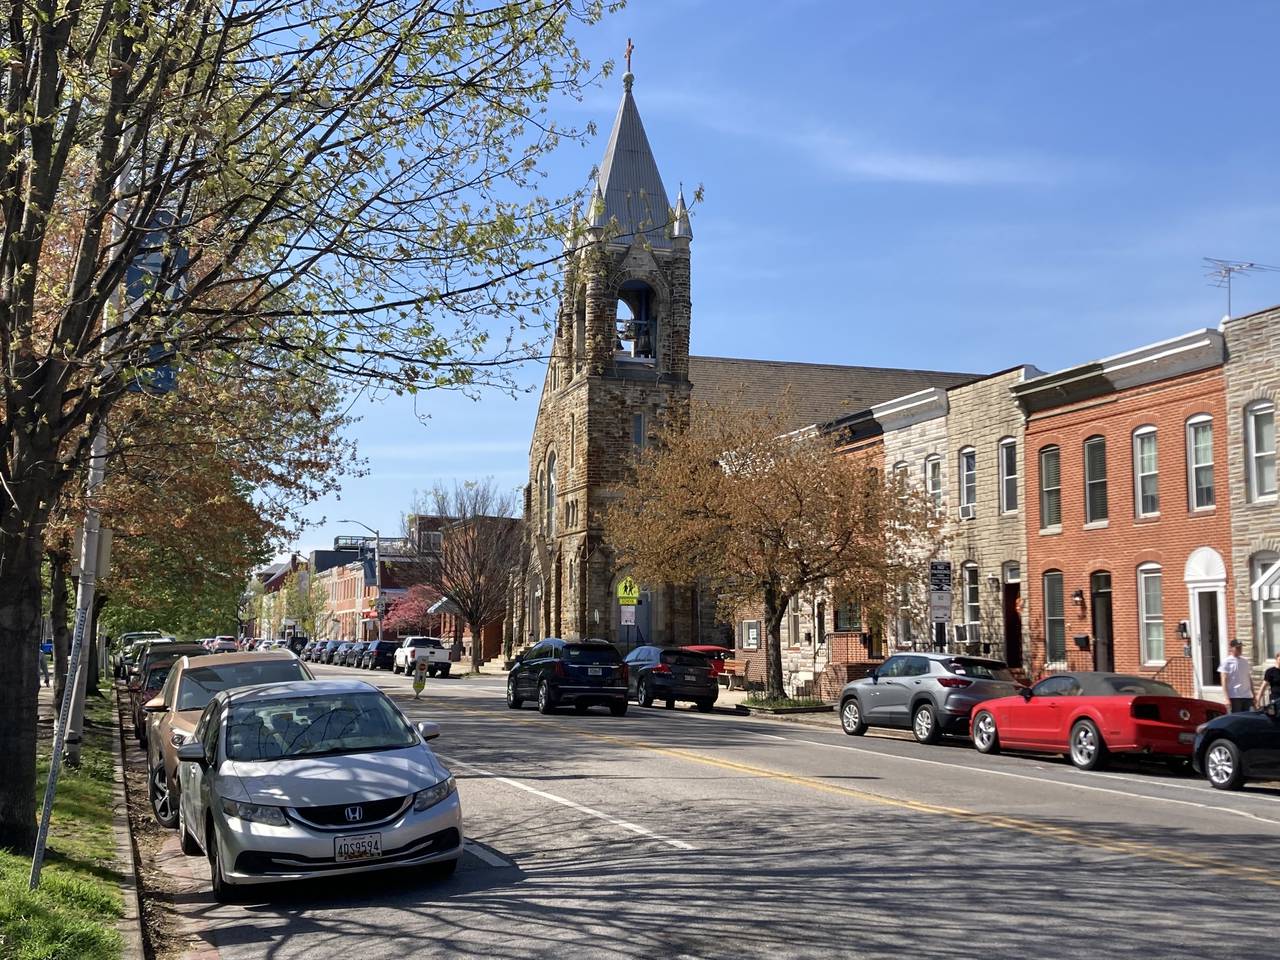 Our Lady of Good Counsel on East Fort Avenue is one of the dozens of city churches targeted for closure. The cornerstone was laid by its former pastor, Cardinal Gibbons, in 1889, when it served many Irish immigrants.